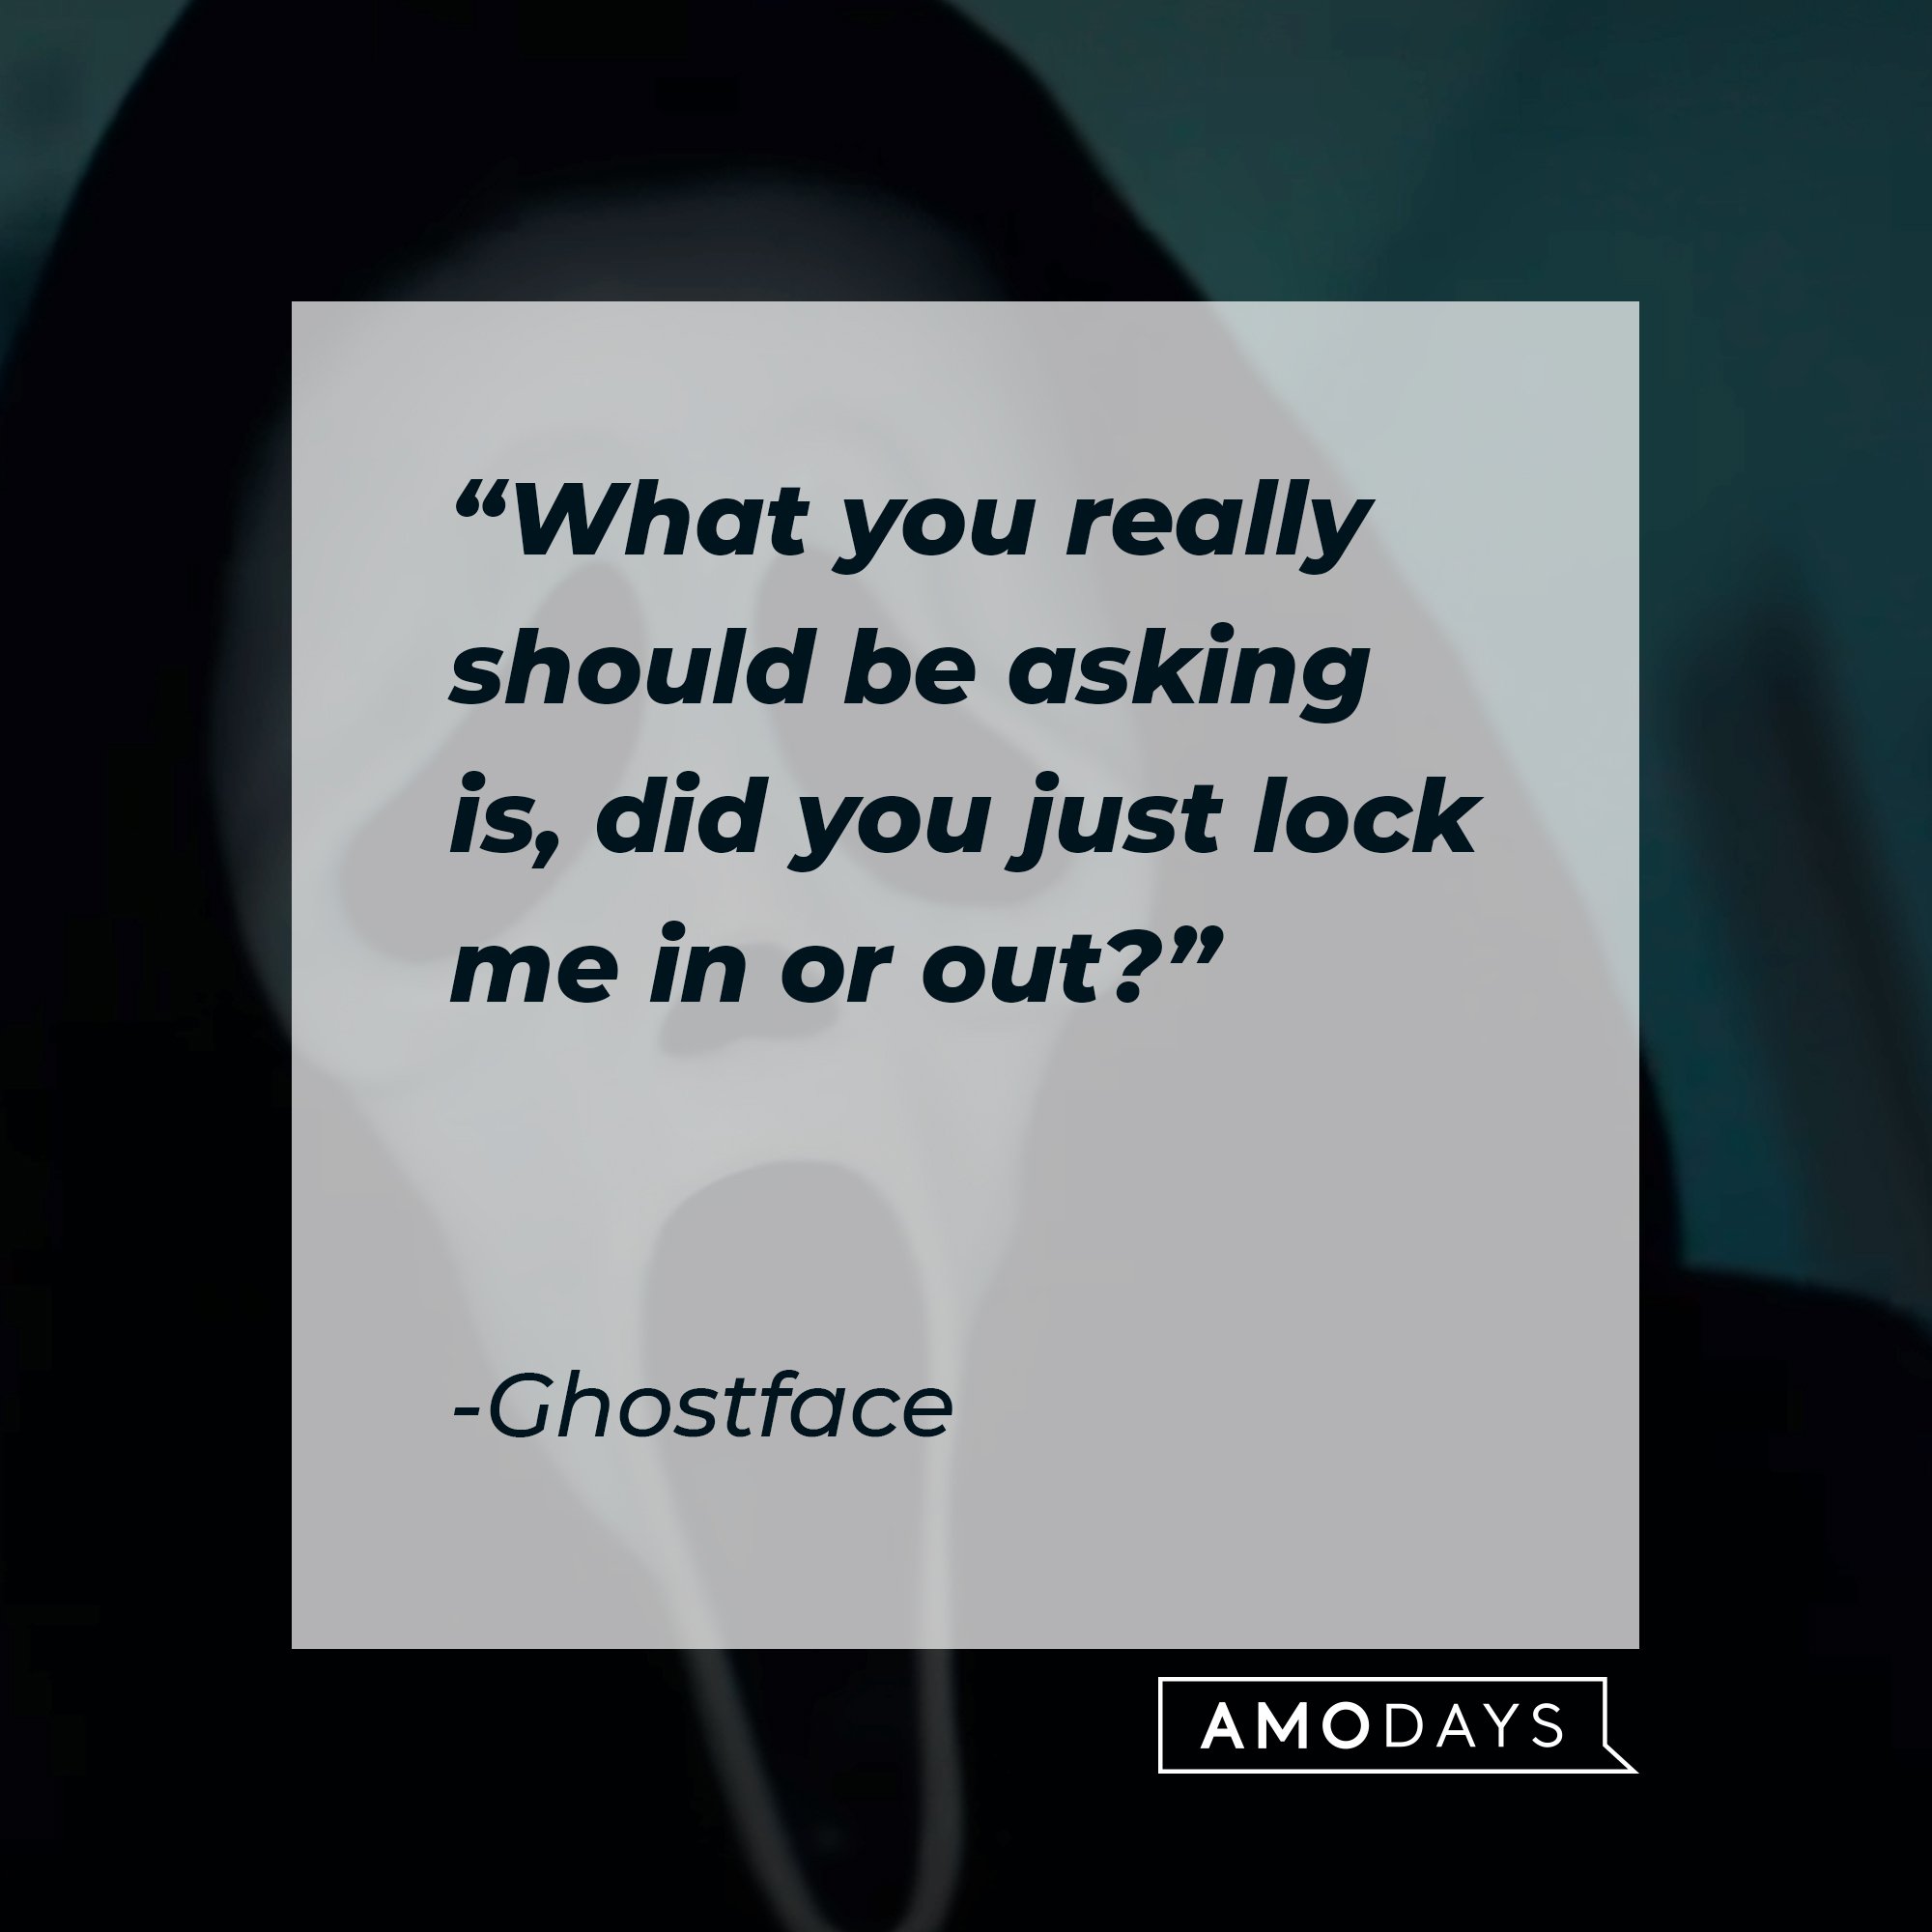 Ghostface's quote: "What you really should be asking is, did you just lock me in or out?" | Image: AmoDays